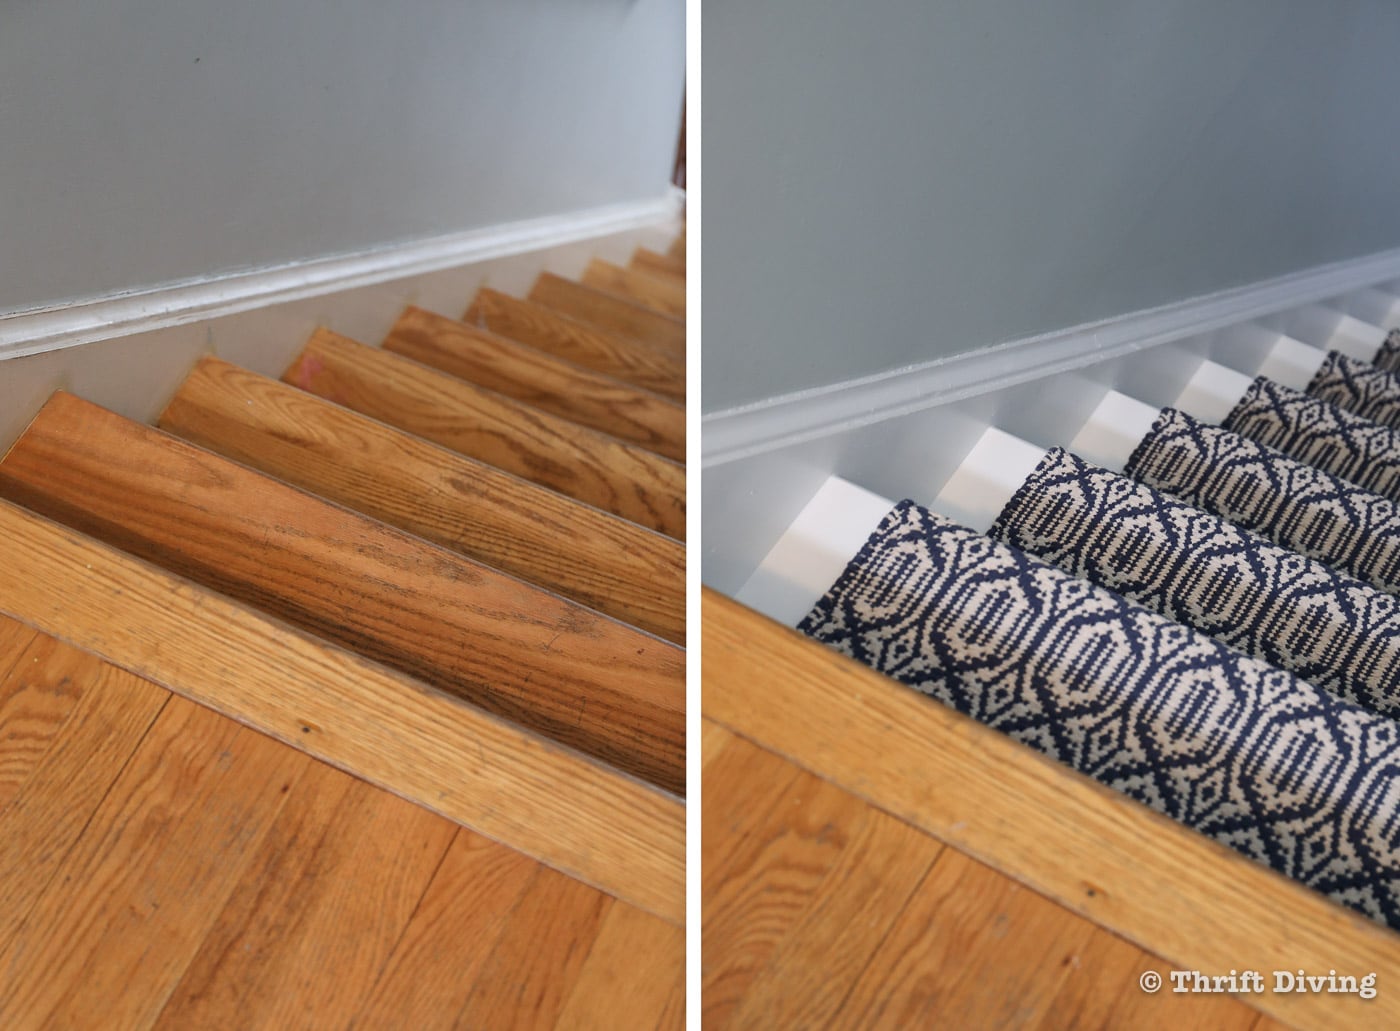 How to Install a Stair Runner - Stairs are much safer when there is a stair runner that can offer traction to reduce the chances of a fall. - Thrift Diving